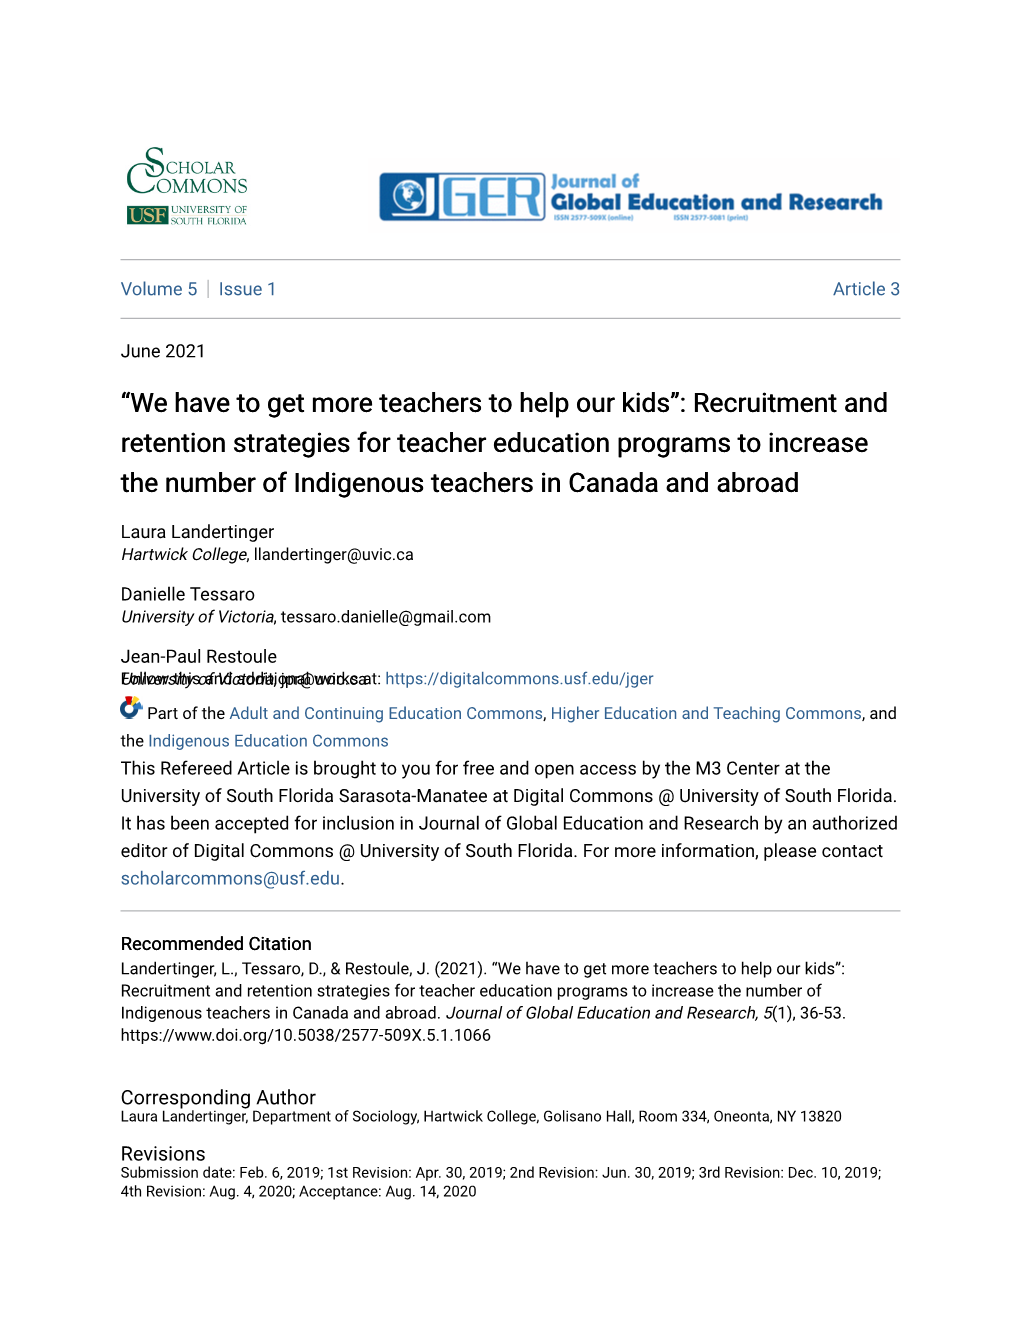 Recruitment and Retention Strategies for Teacher Education Programs to Increase the Number of Indigenous Teachers in Canada and Abroad